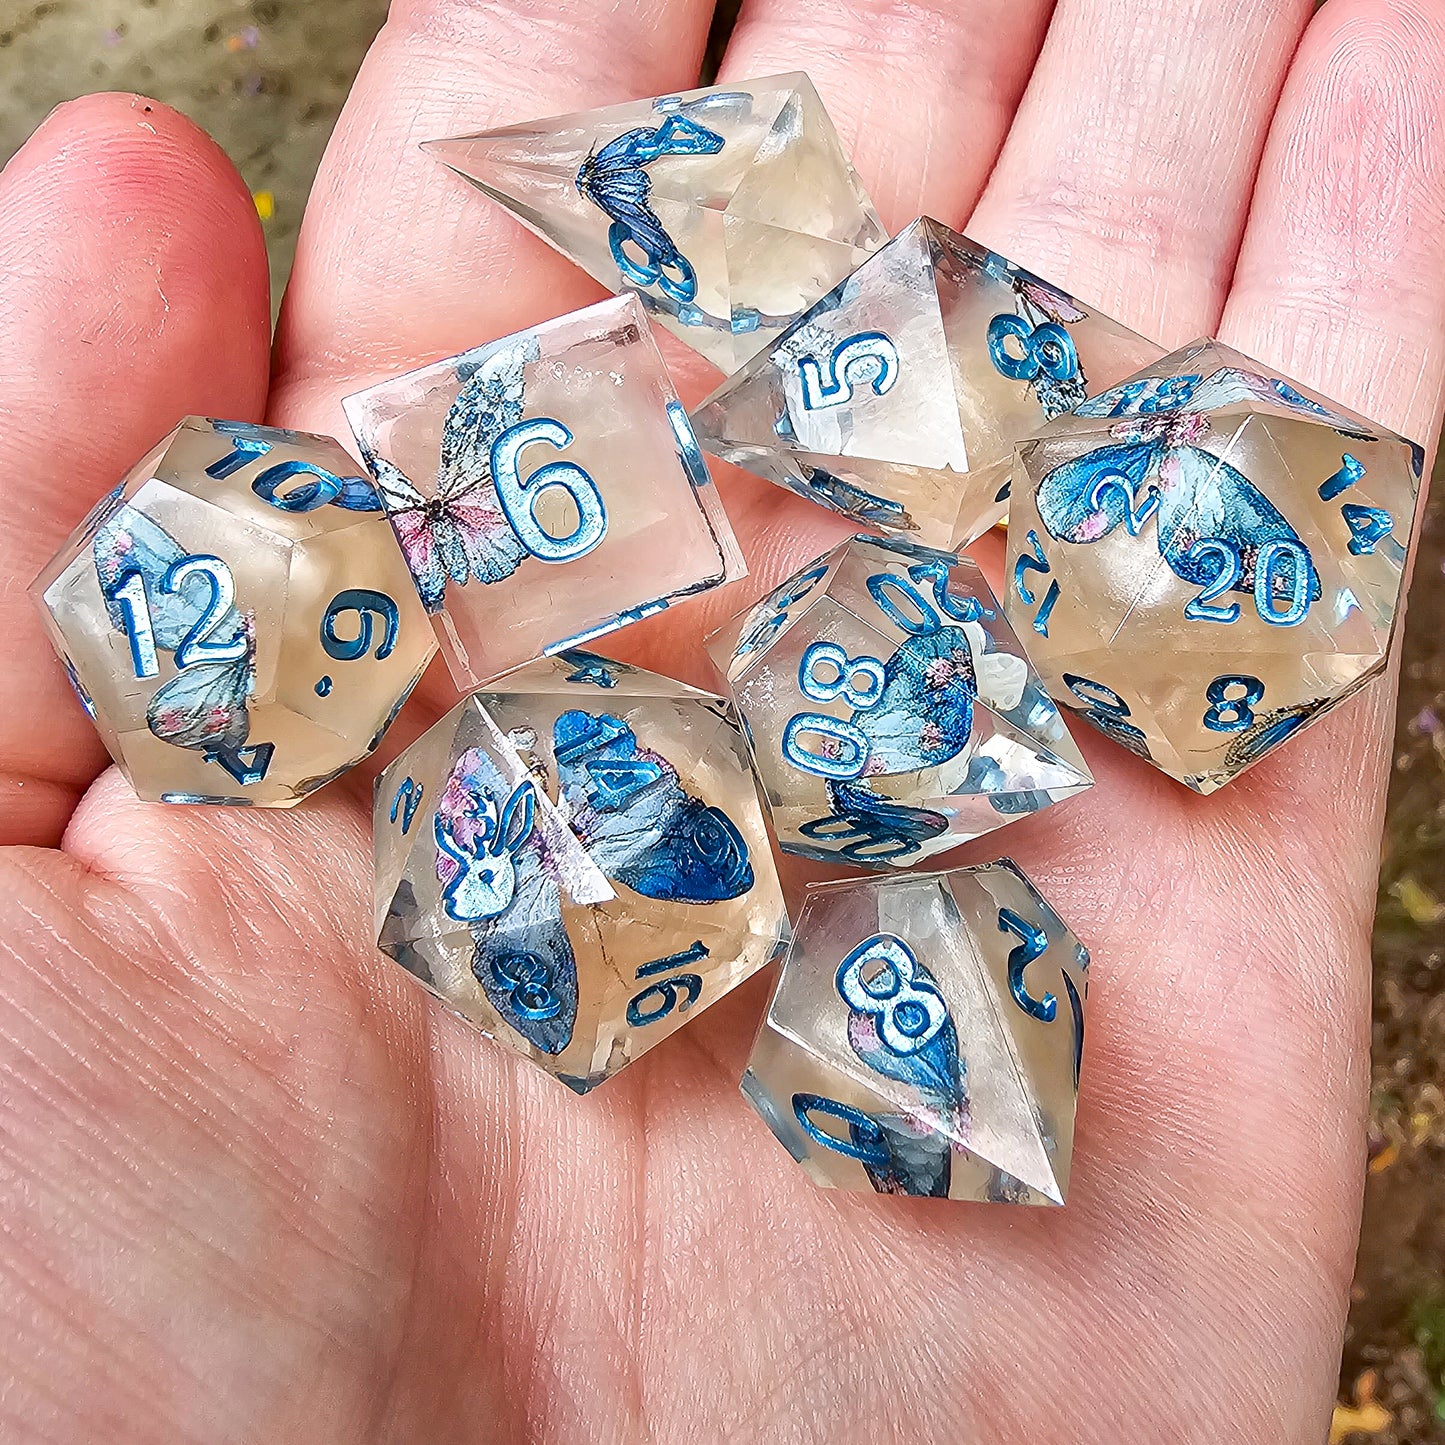 The Butterfly Effect 8 piece dice set